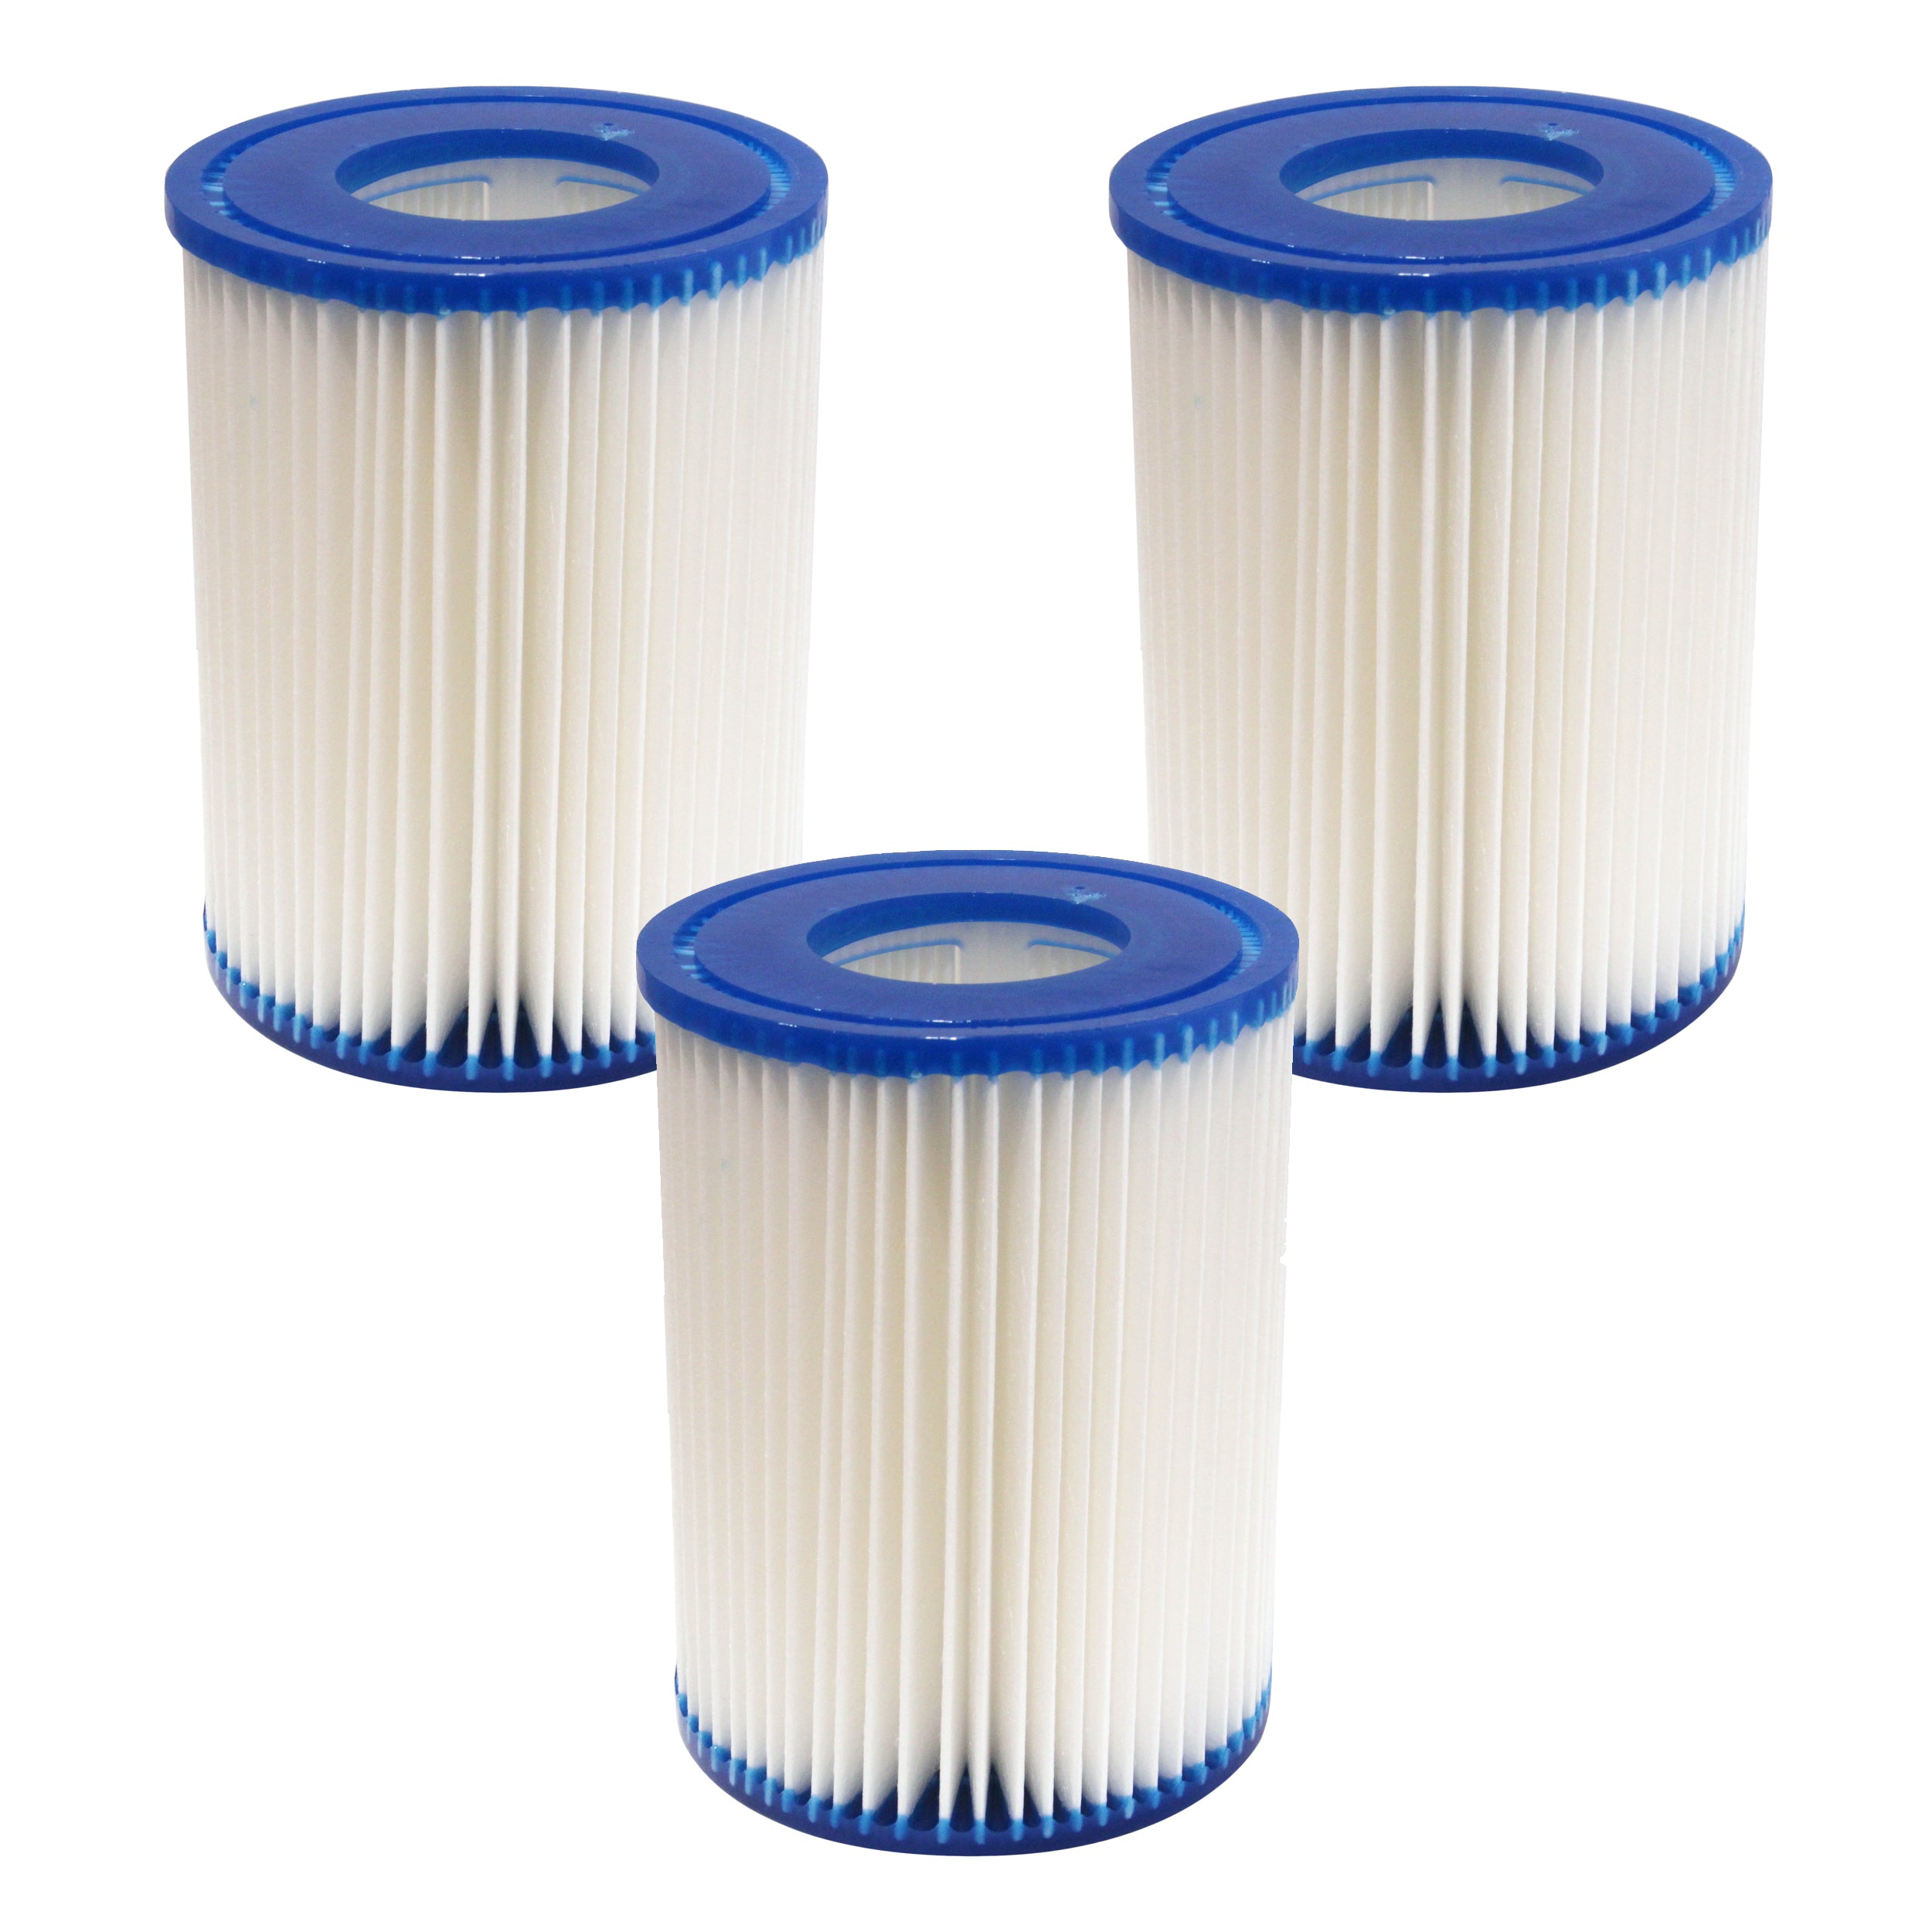 Replacement Filter for Bestway Filter Cartridge II Lay Z Spa Filter pump